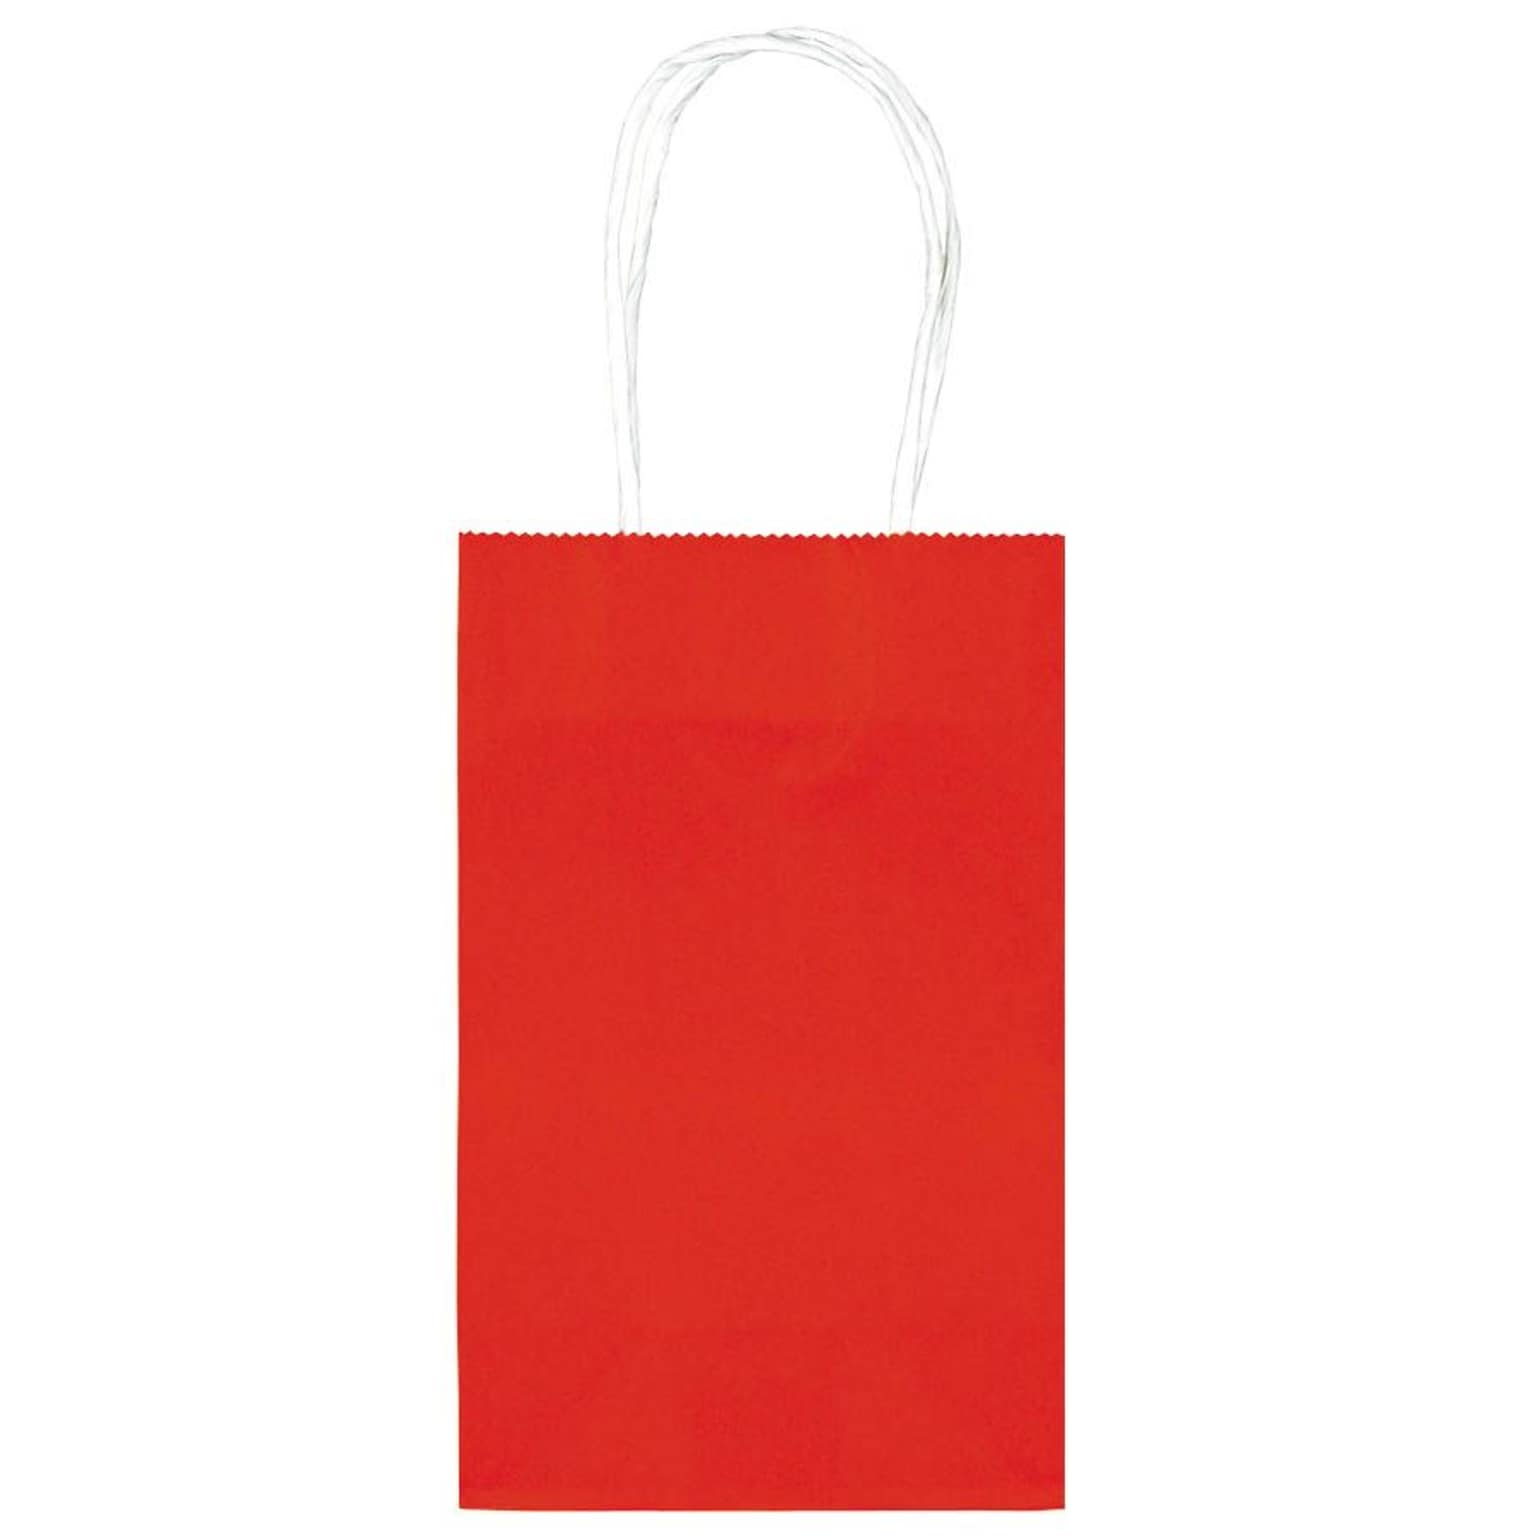 Amscan Cub Bags Value Pack, Red, 4 Bags/Pack (162500.07)